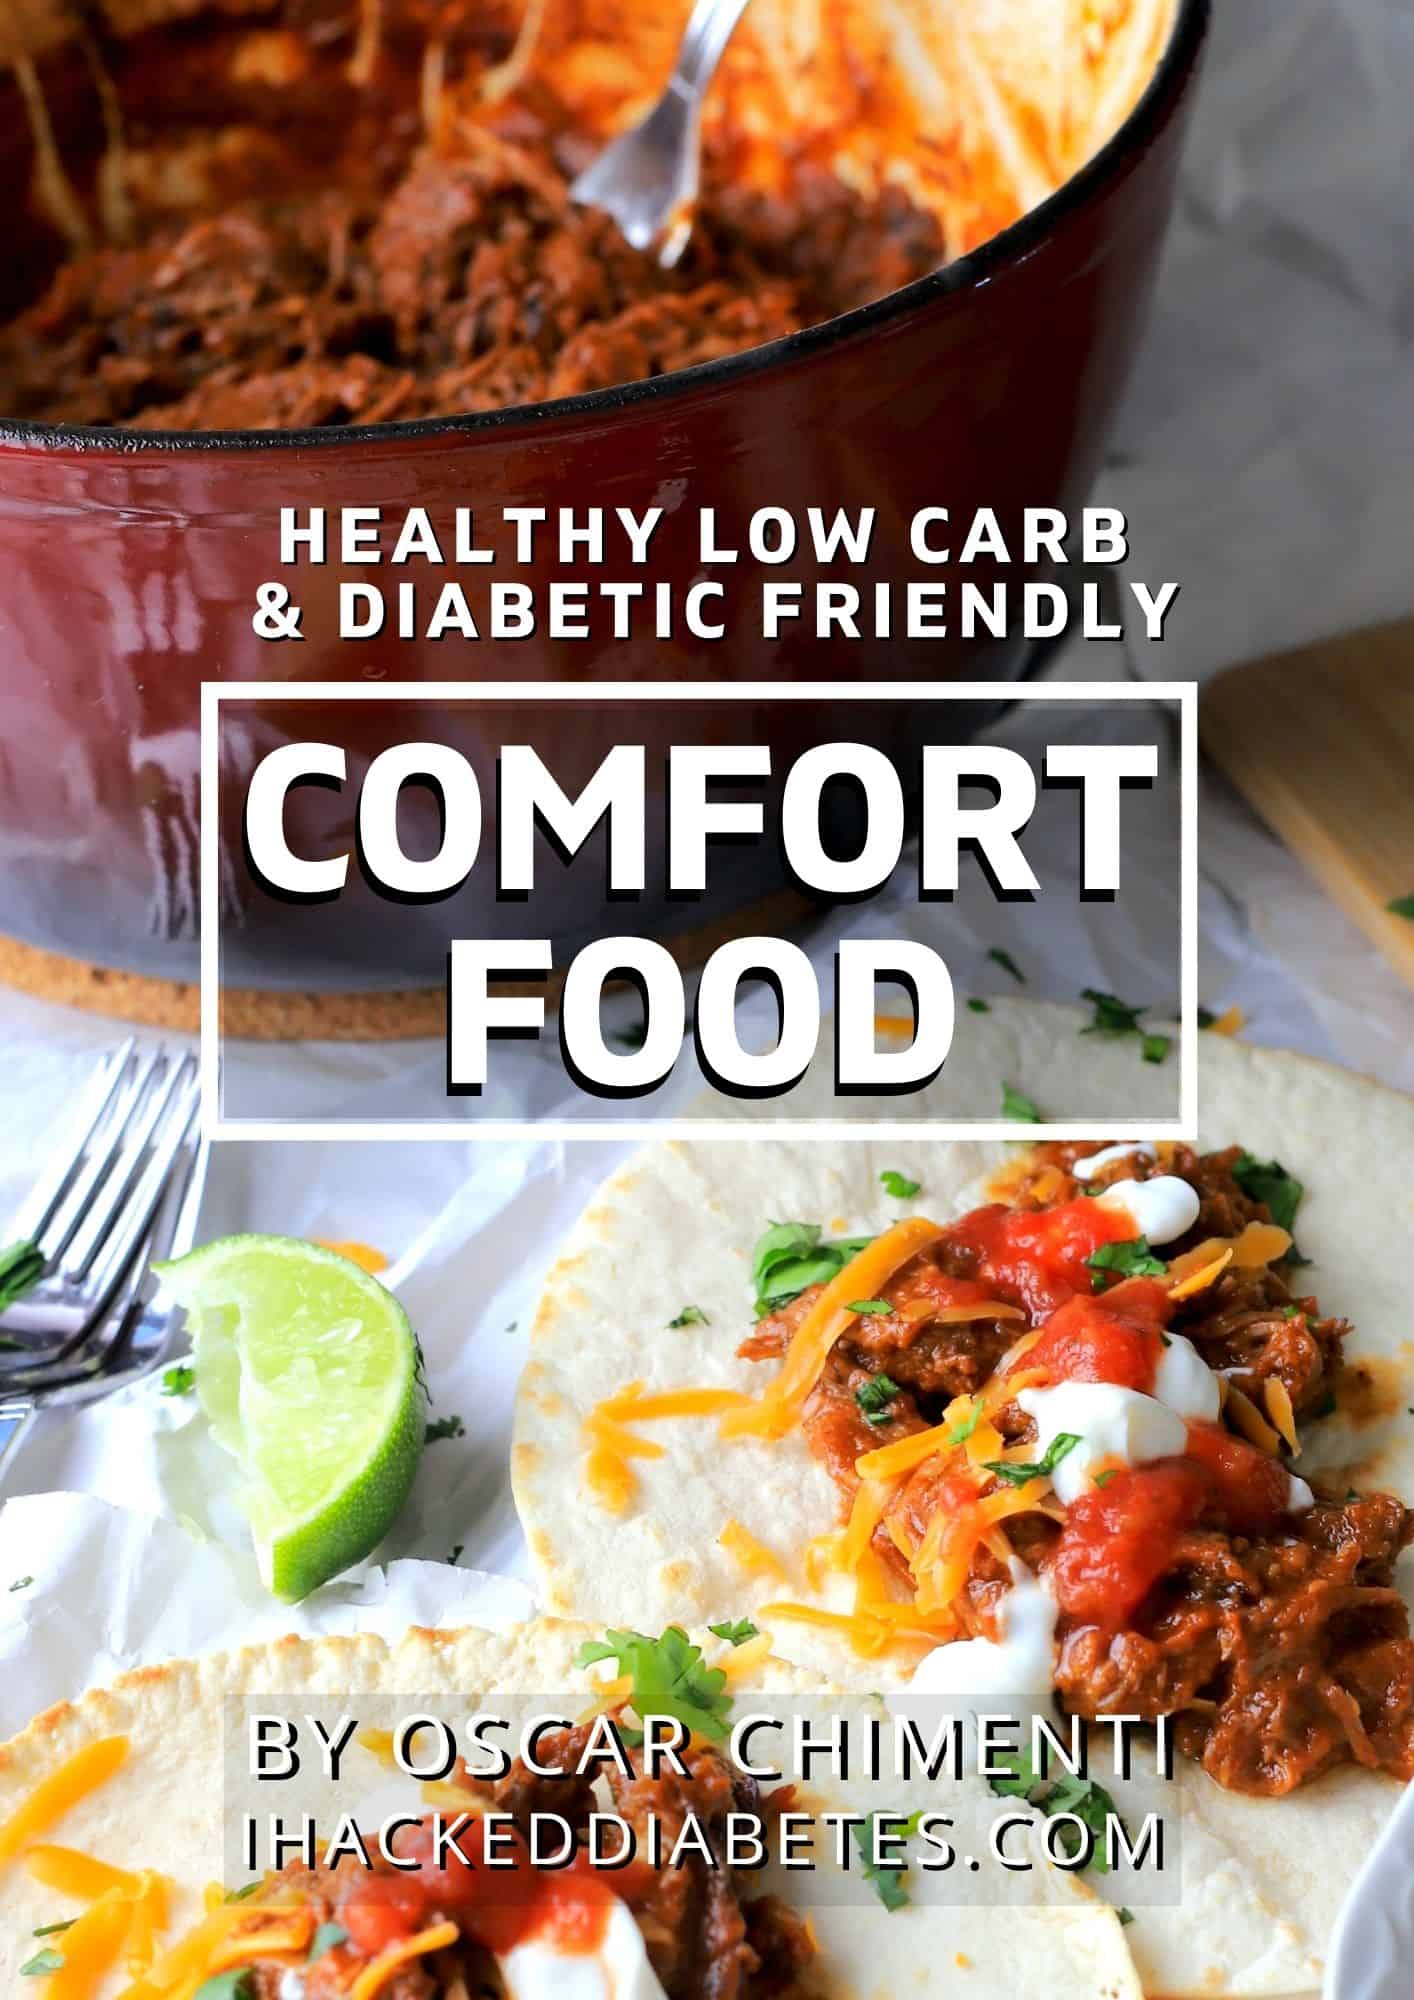 Healthy low carb and diabetic friendly Comfort Food book cover image.